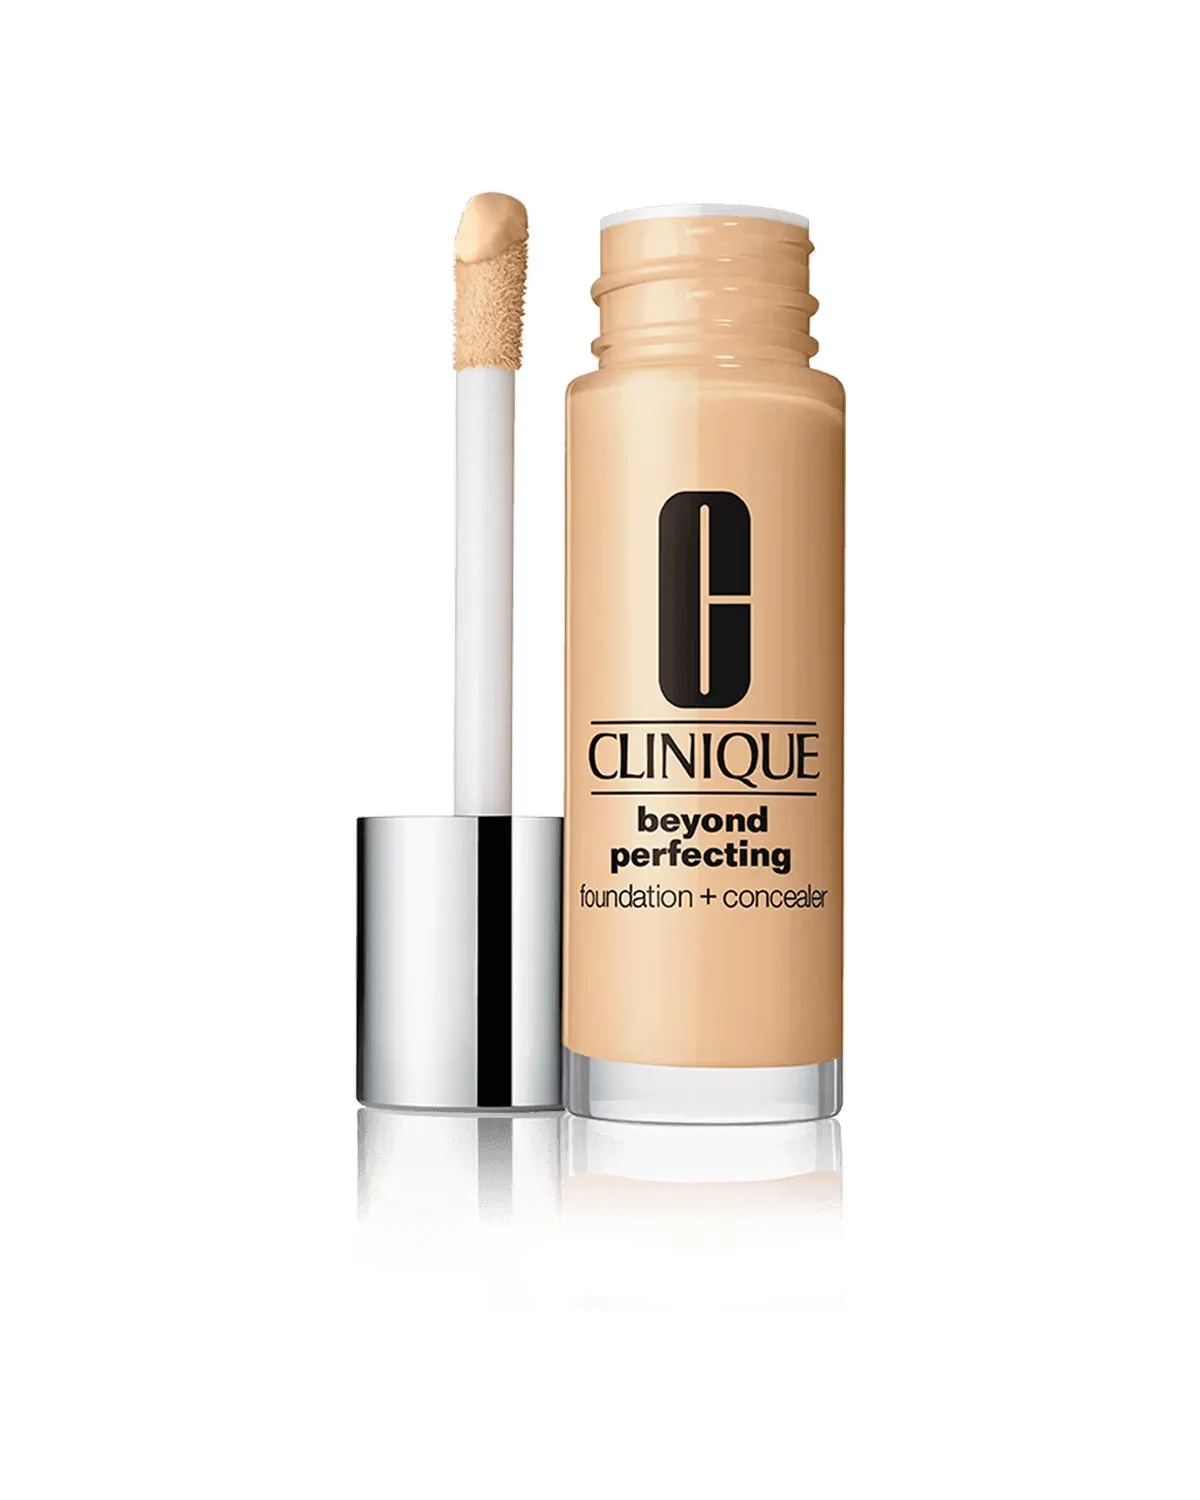 FEMMENORDIC's choice in the Clinique Beyond Perfecting vs Even Better comparison, the Clinique Beyond Perfecting Foundation and Concealer.